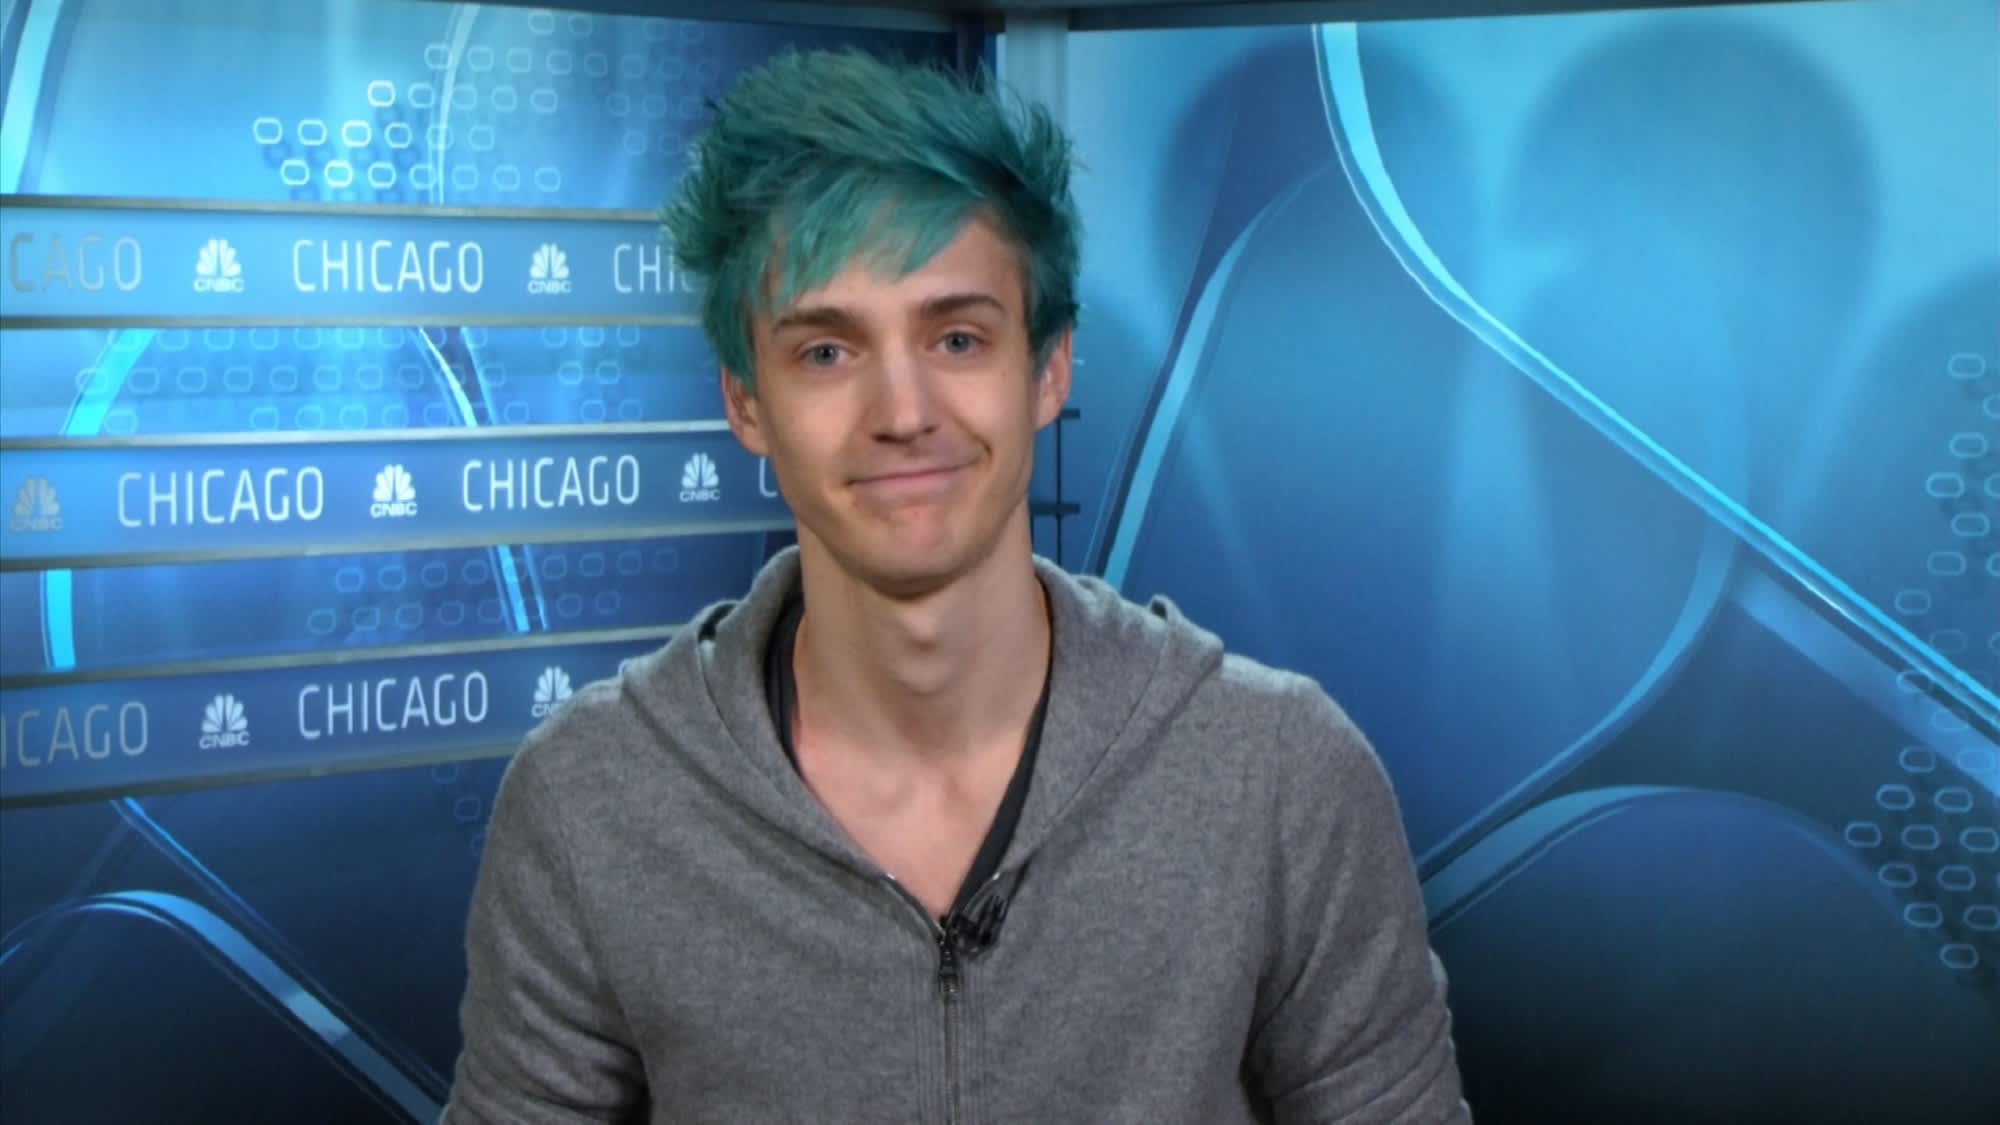 Ninja Blevins From A Fast Food Job To Millionaire Fortnite Gamer - how gamer tyler ninja blevins went from working at a fast food joint to making almost 1 million a month playing fortnite